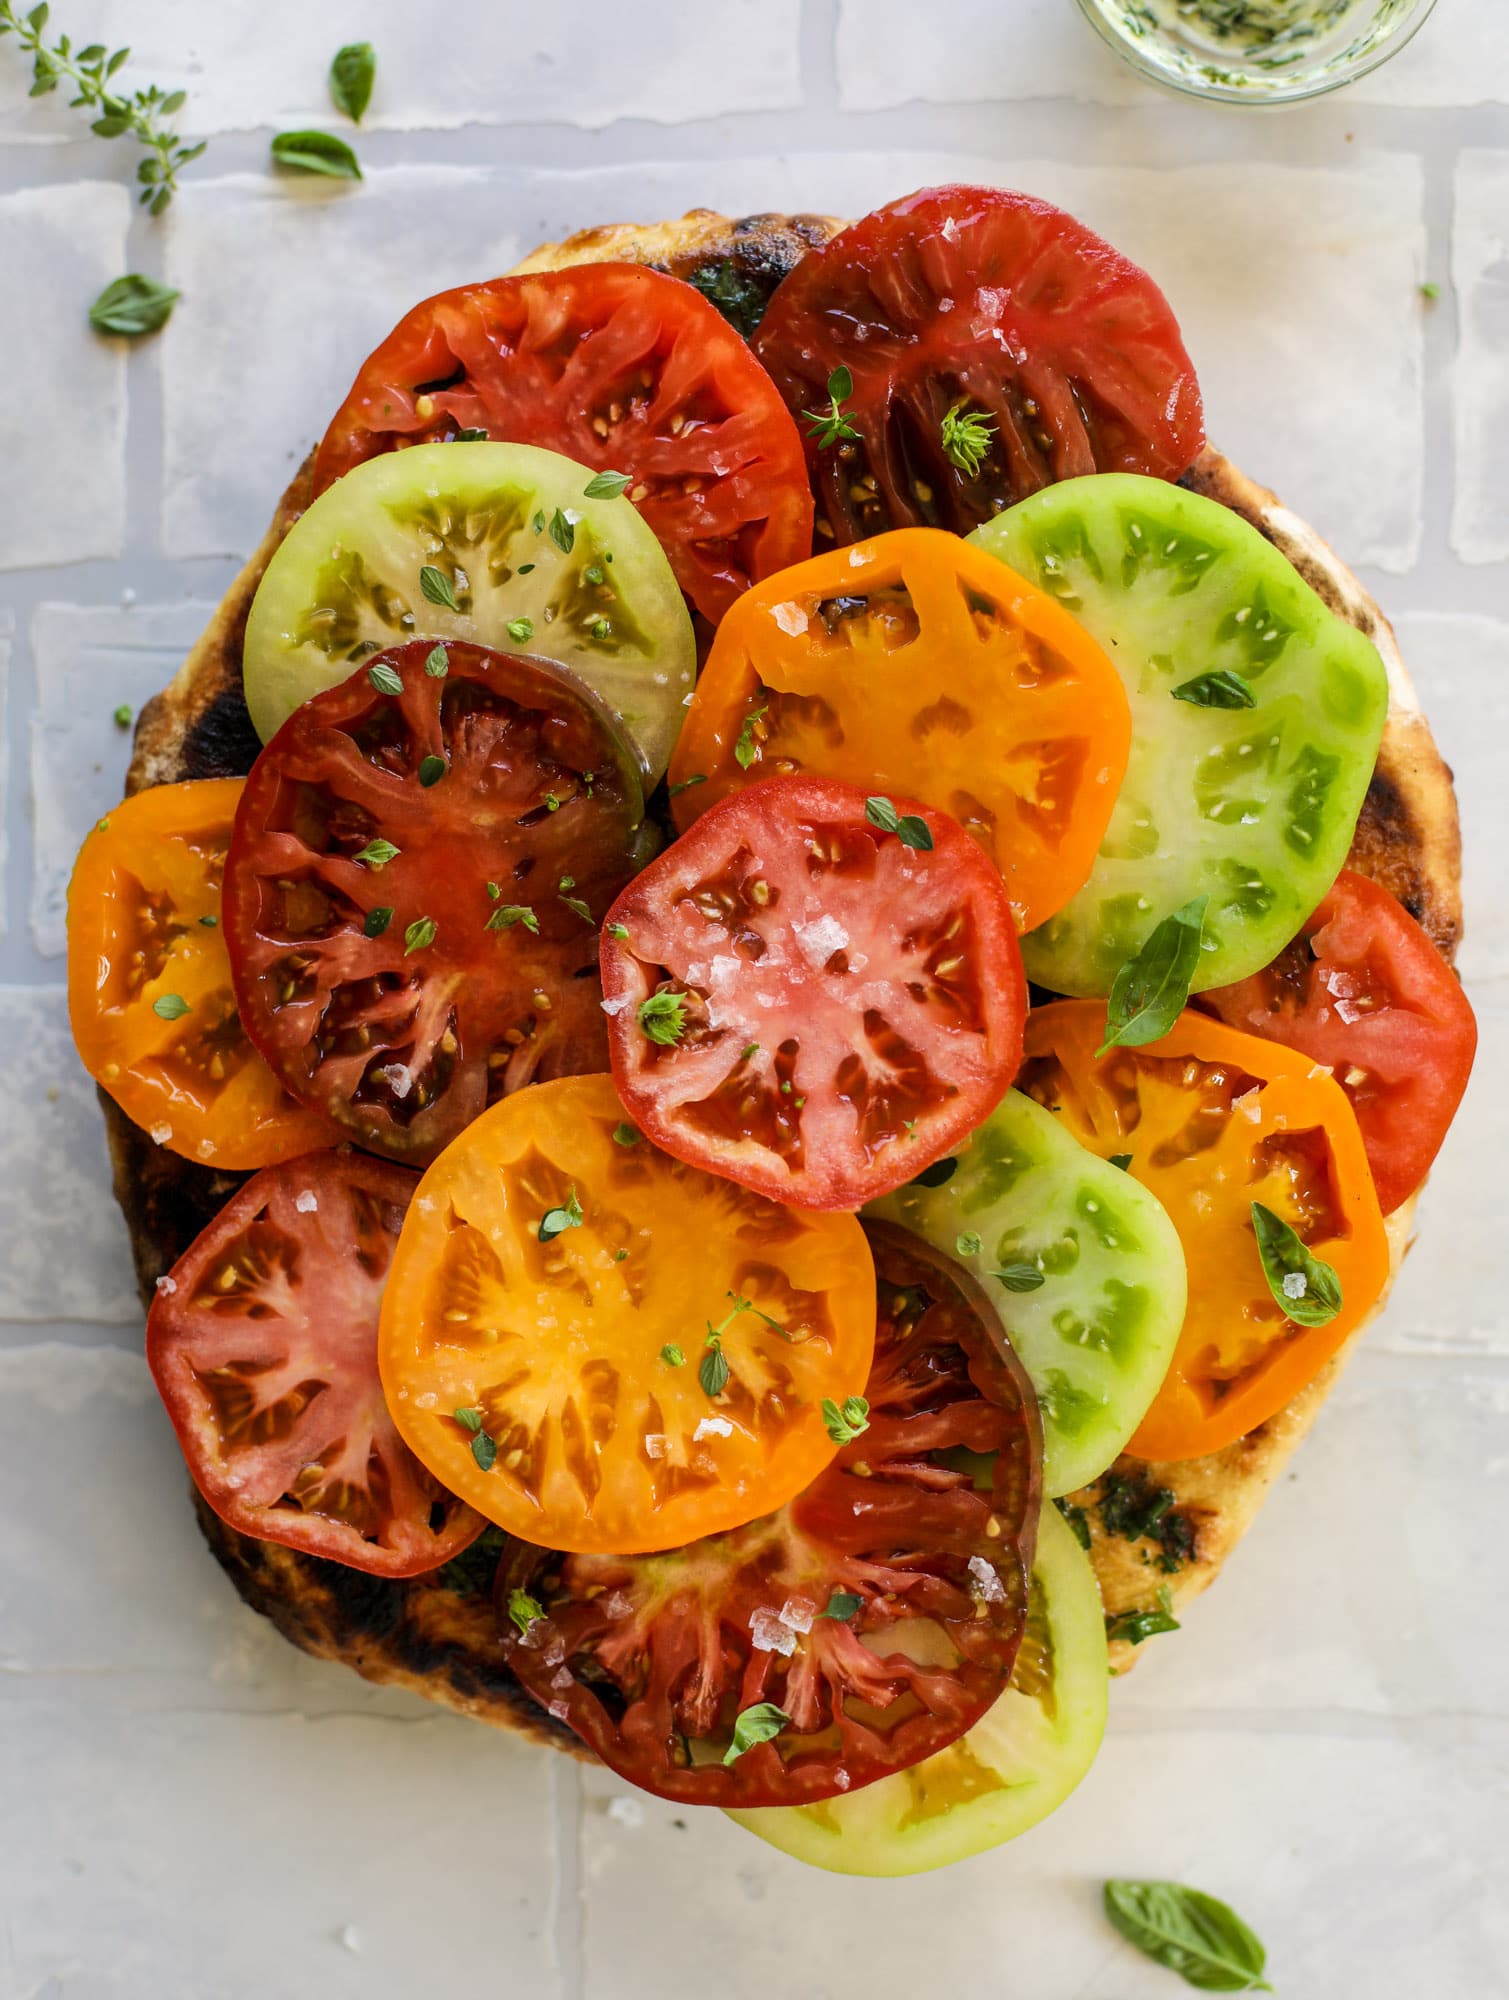 This heirloom tomato pizza starts with a grilled garlic herb butter crust! Melty herb butter and sliced fresh tomatoes top it off for a delicious bite!